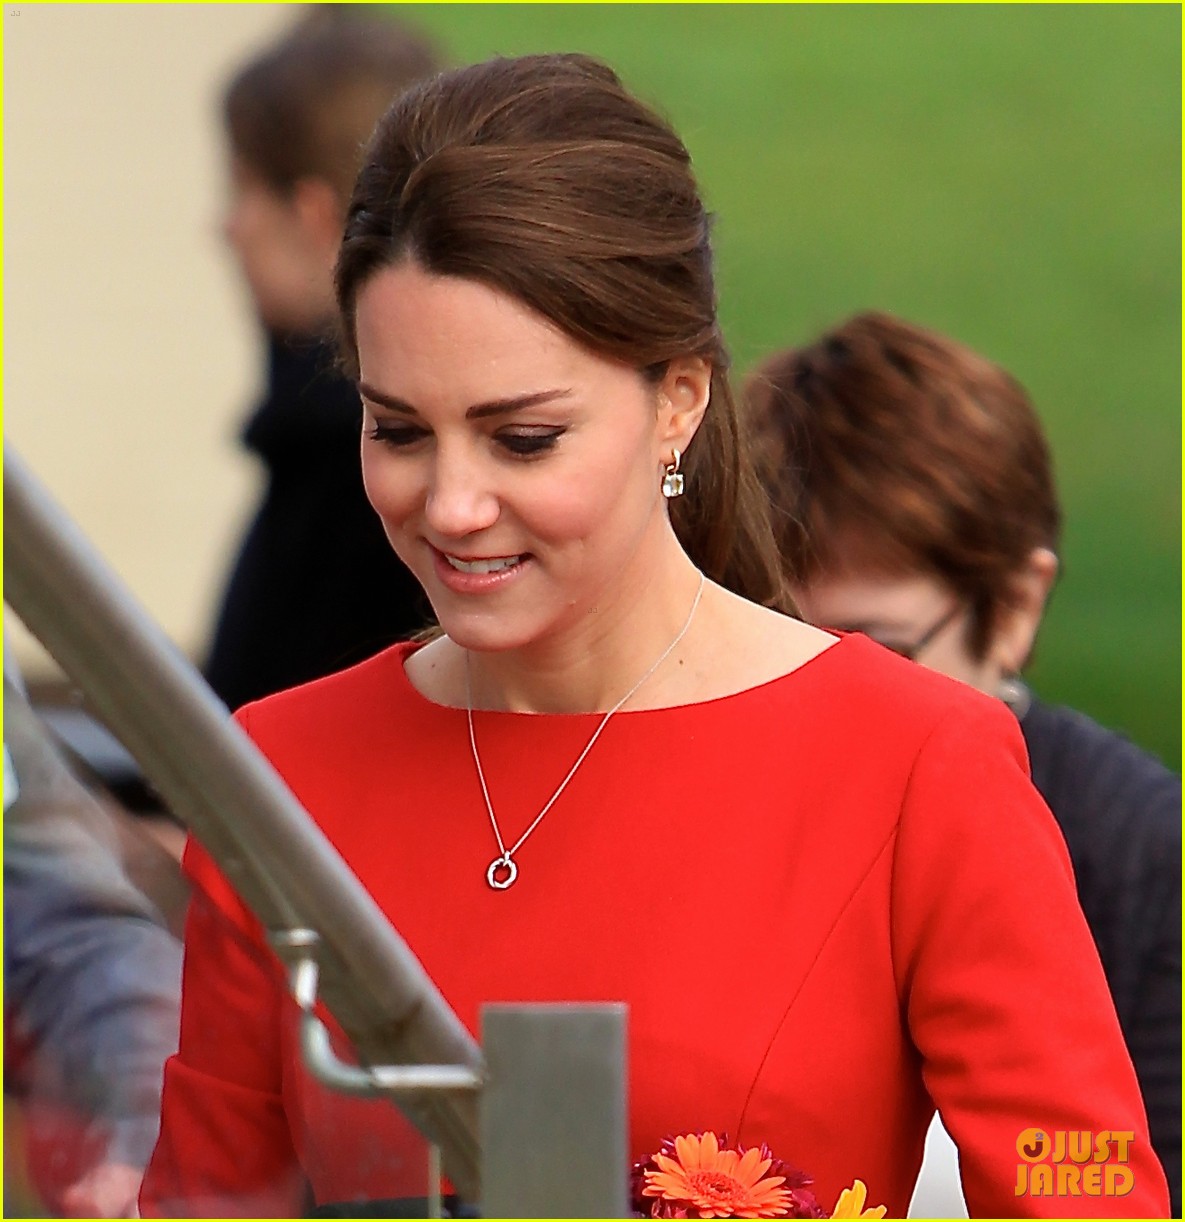 kate middleton shows tiny baby bump in red dress 04